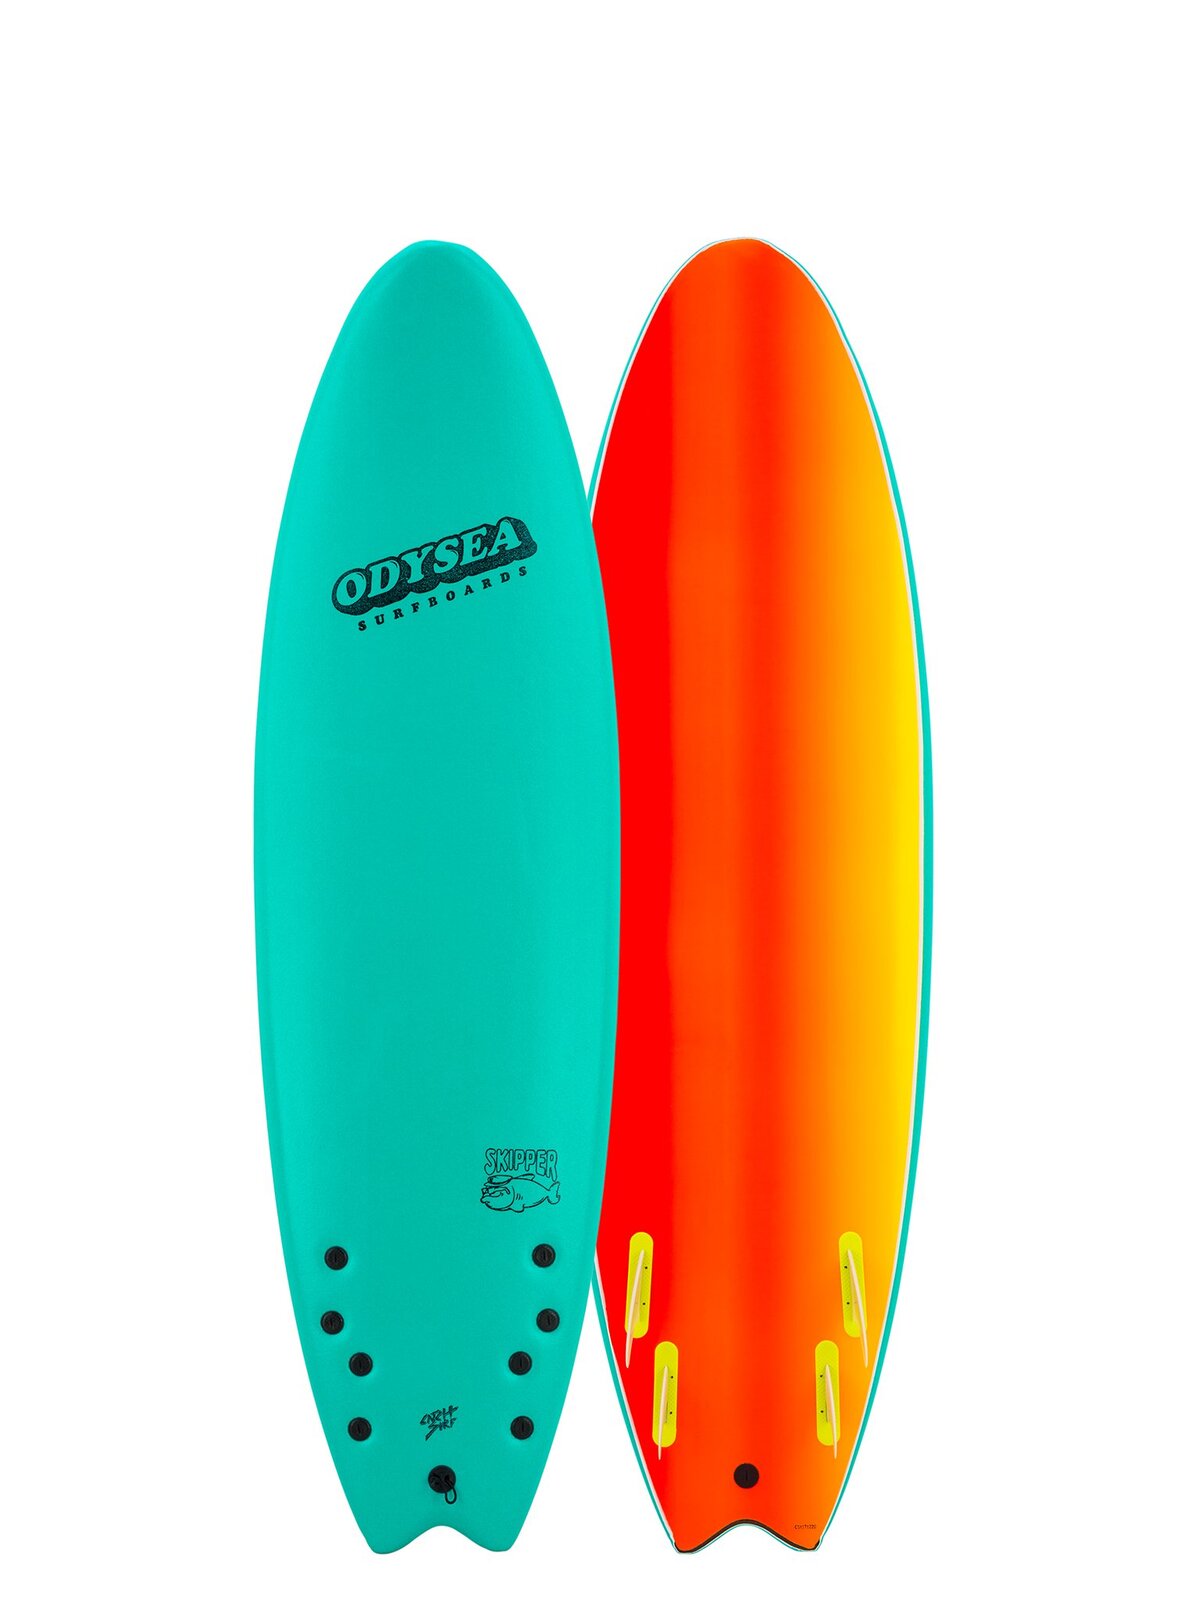 Catch Surf Odysea Skipper 6'6 Quad. This surfboard is designed for 